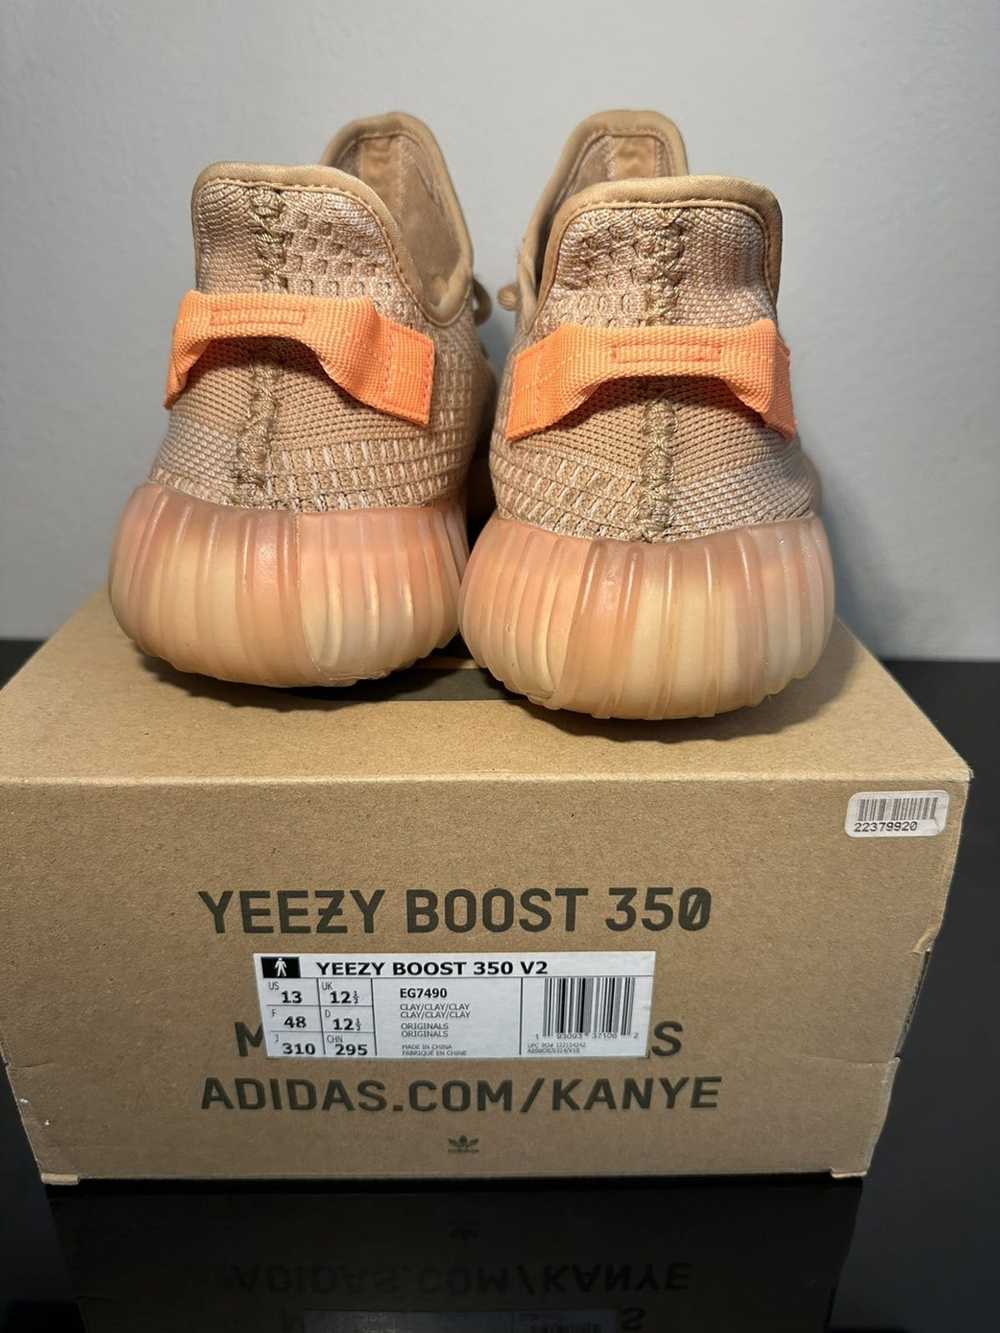 Adidas Yeezy boost 350 clay size 13 - image 2